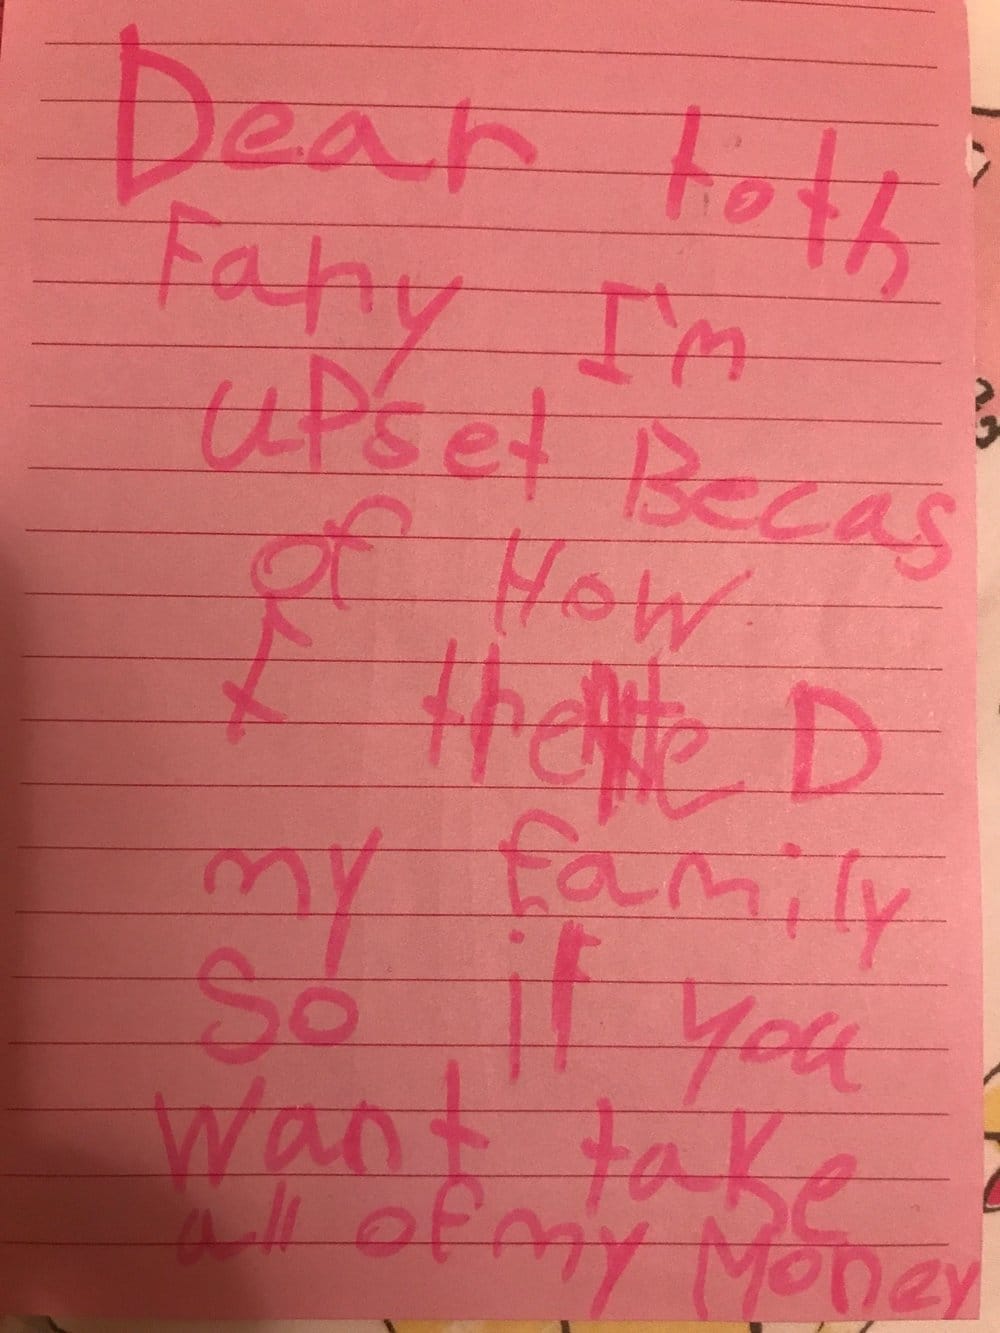 Dear Tooth Fairy, I’m upset because of how I treated my family. So if you want, take all of my money.